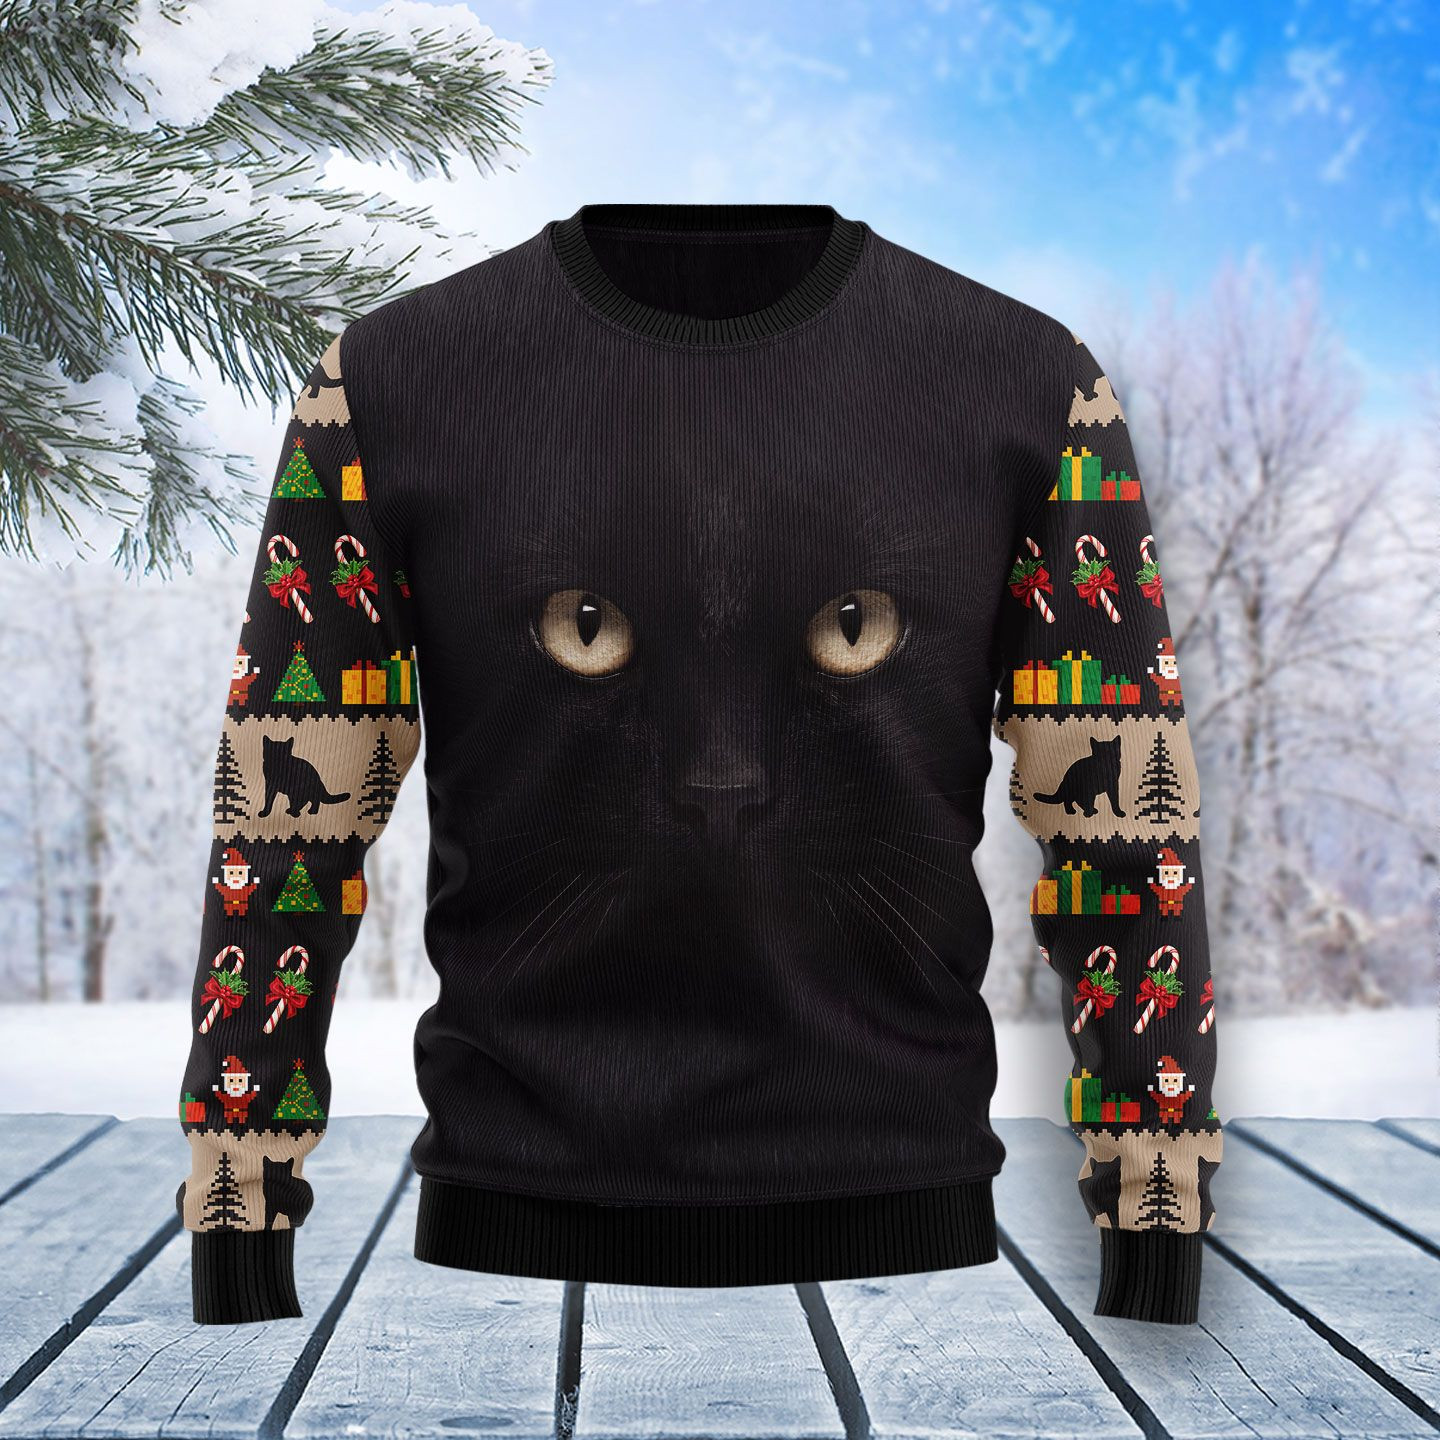 Black Cat Cute Face Ugly Christmas Sweater Ugly Sweater For Men Women